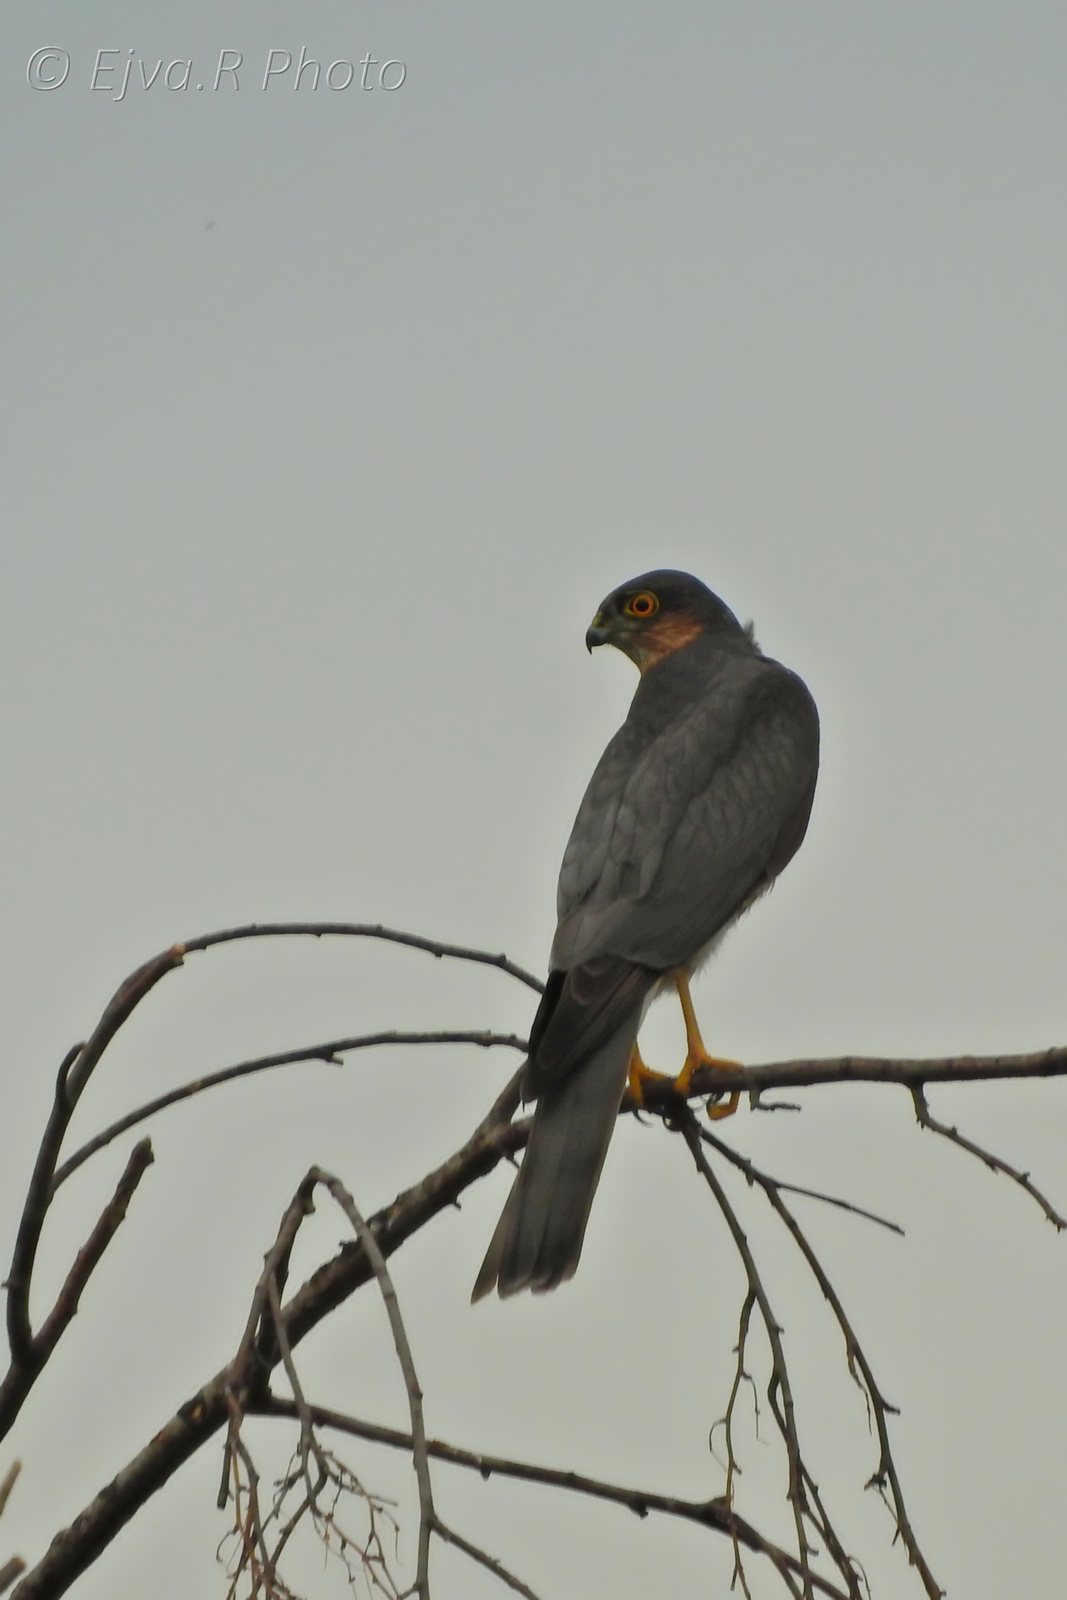 A karvaly (Accipiter nisus)